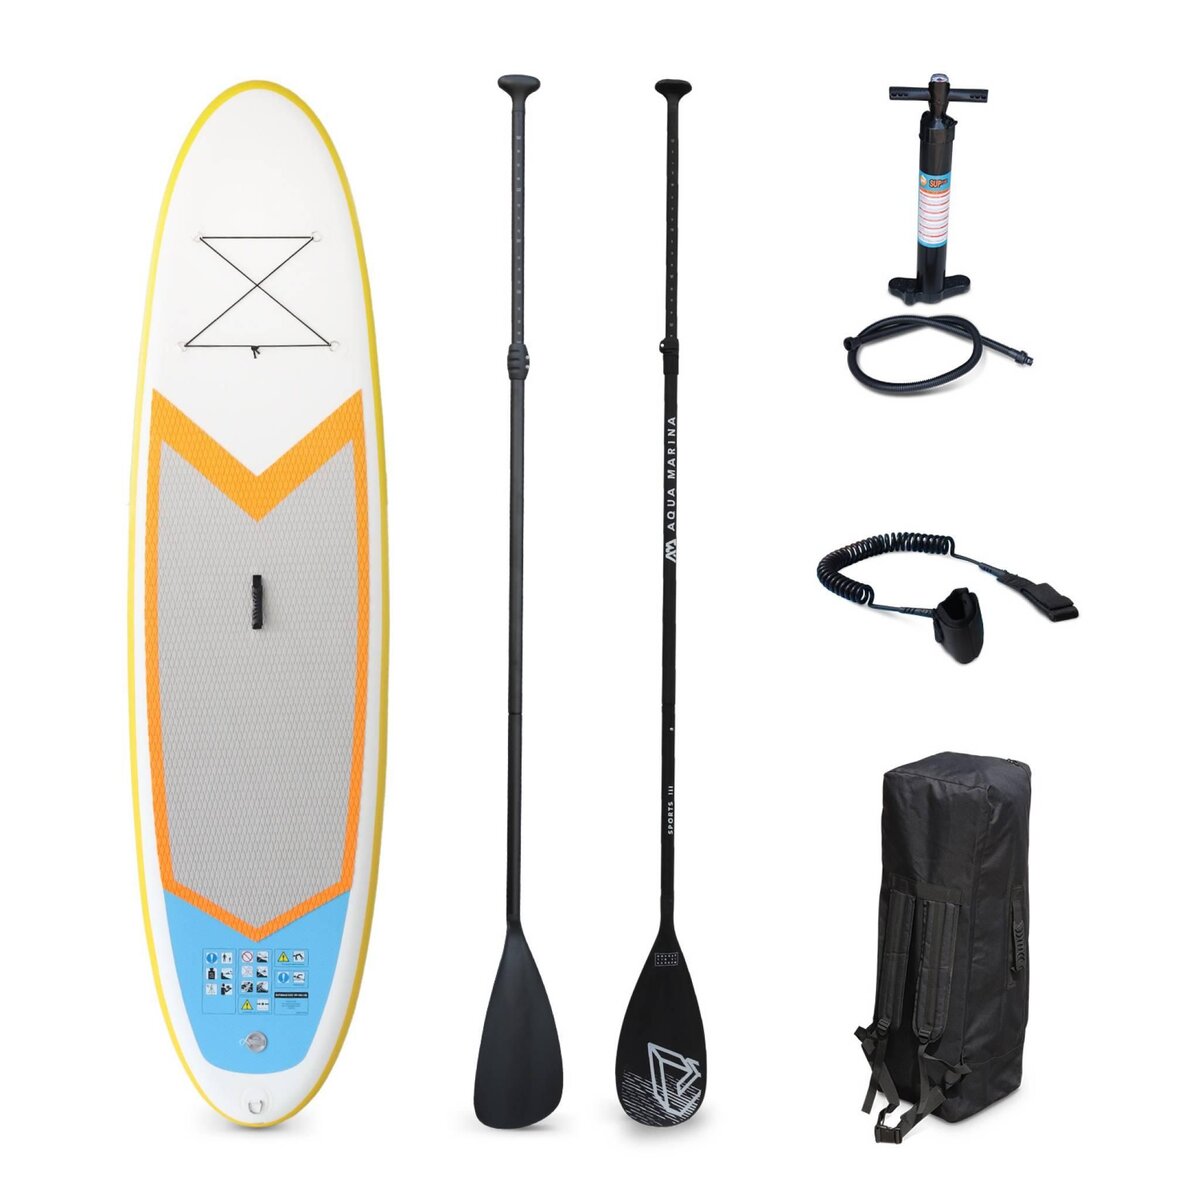 Pompe double action pour stand up paddle